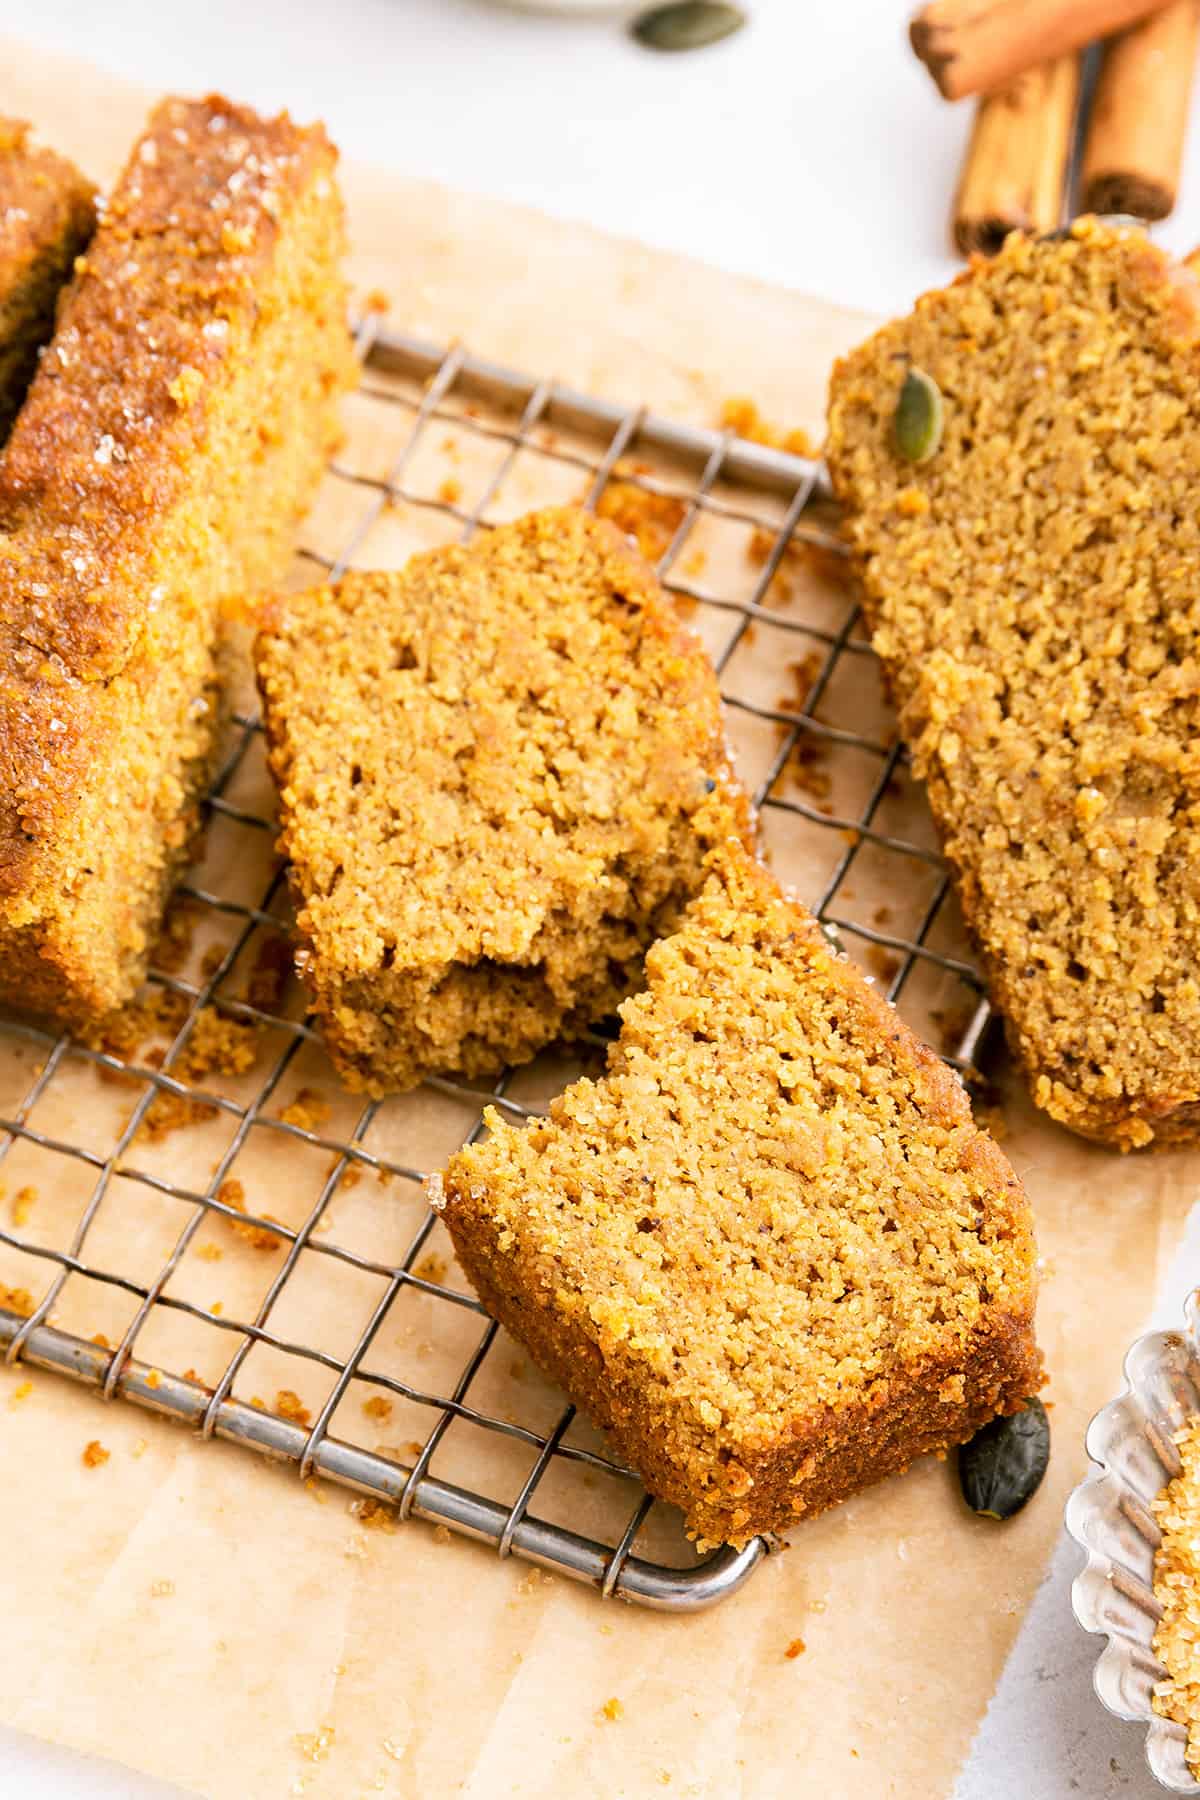 Slices of vegan pumpkin bread on wire rack set on cutting board, with one slice torn in half